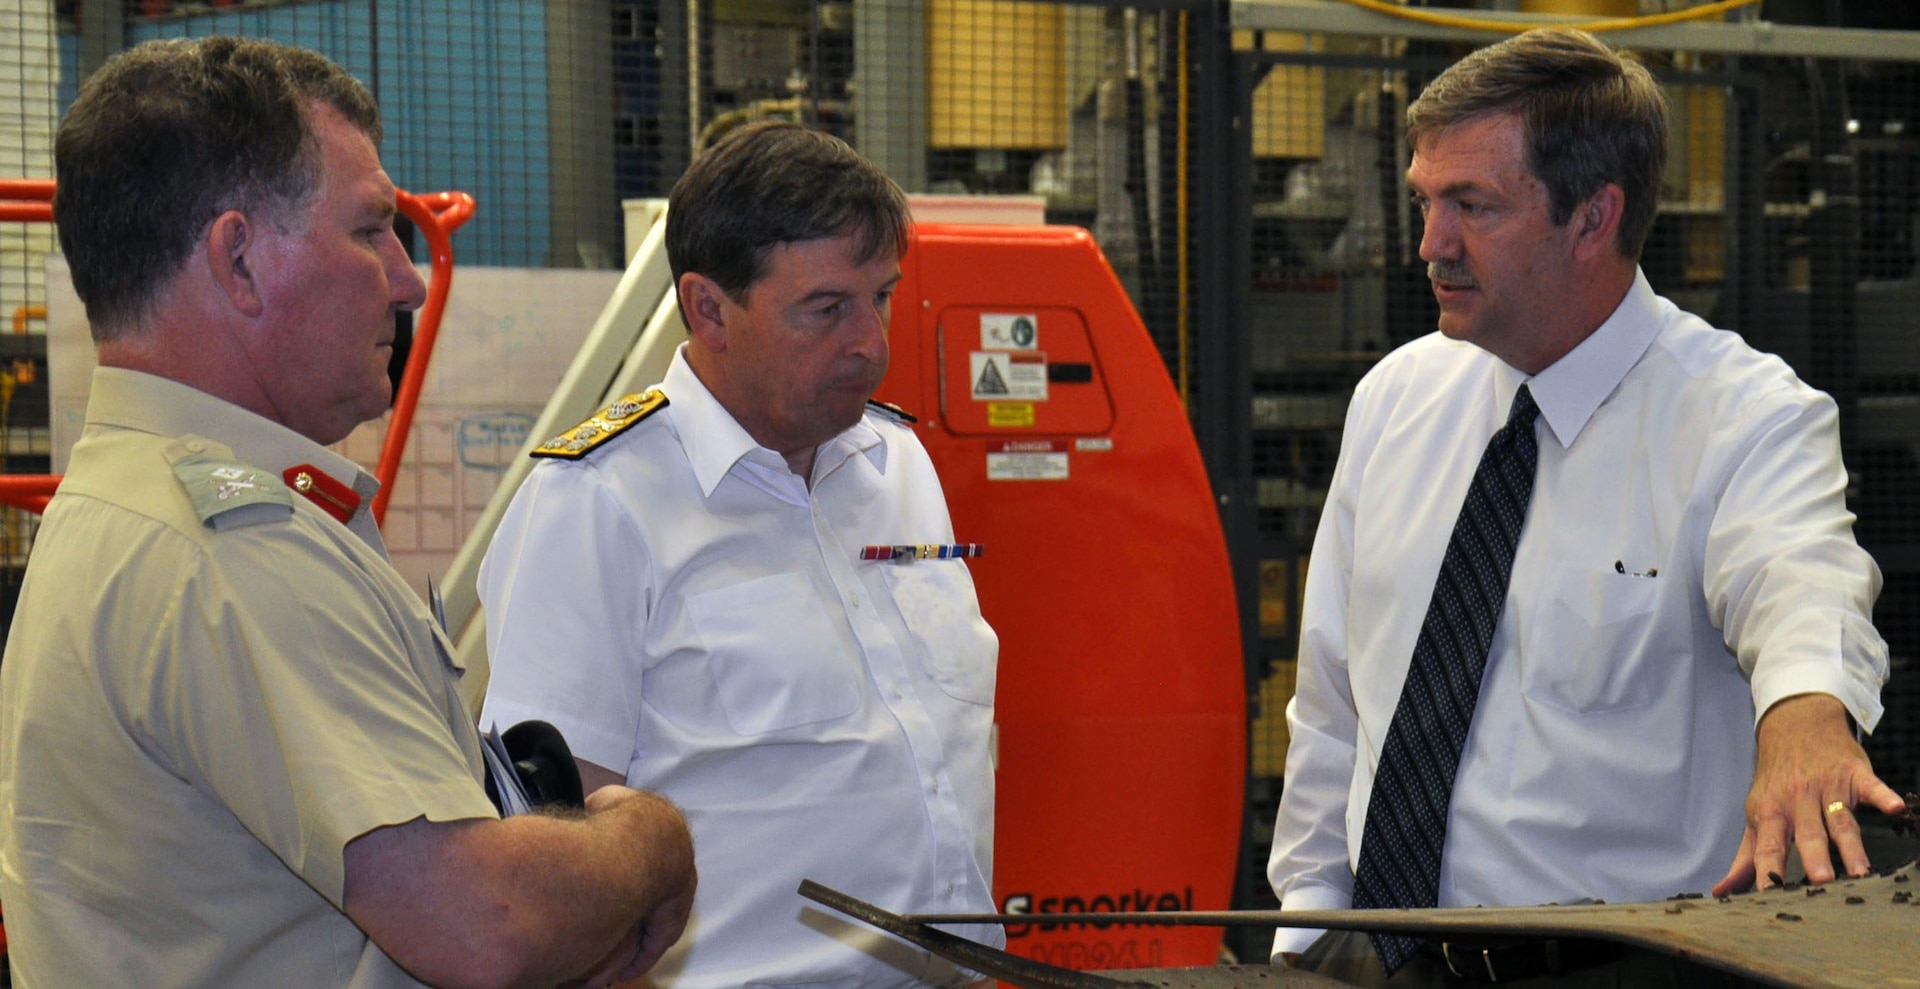 Naval Surface Warfare Center Dahlgren Division (NSWCDD) Electromagnetic Railgun Program Director Chester Petry describes the hypervelocity projectile's capability to UK Defense Attaché to the US, Maj. Gen. Richard Cripwell, left, and UK Royal Navy Second Sea Lord Vice Adm. Jonathan Woodcock, June 10. The second sea lord - responsible for the delivery of the British naval service's current and future personnel, equipment and infrastructure - visited NSWCDD with his delegation for briefings on various technological programs, including the electromagnetic railgun - a long-range naval weapon that fires projectiles using electricity instead of traditional gun propellants such as explosive chemicals. The hypervelocity projectile is a next-generation, guided projectile capable of completing multiple missions for gun systems such as the Navy 5-Inch, 155-mm, and future railguns. Woodcock and his delegation also toured the Potomac River Test Range - 715 acres of land and a 169-square-nautical-mile water area that stretches along the lower 51 miles of the Potomac River. The British officials looked out over the Potomac and saw firsthand how Dahlgren's gun test facility evolved and expanded to include numerous scientific and response-force missions serving all branches of the United States armed forces.